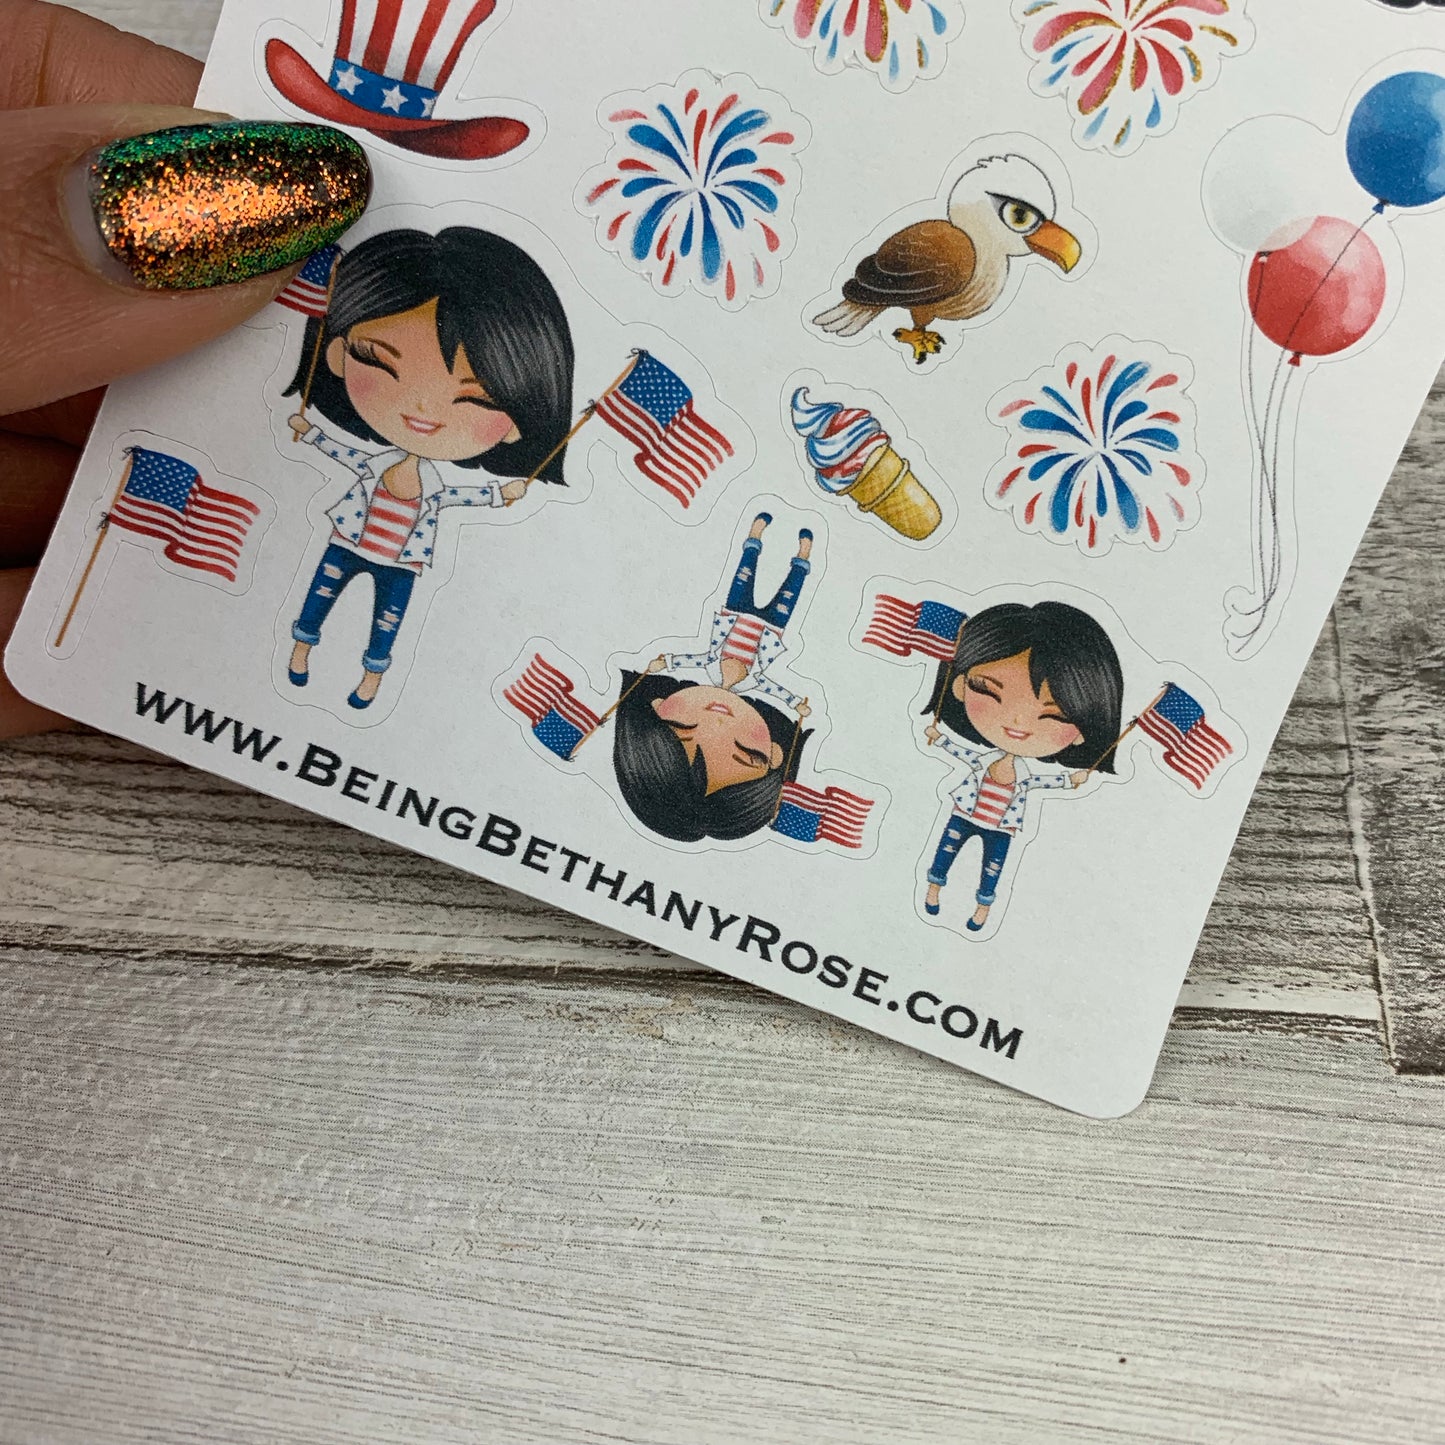 American Girl (Flag) stickers (DPD1460)